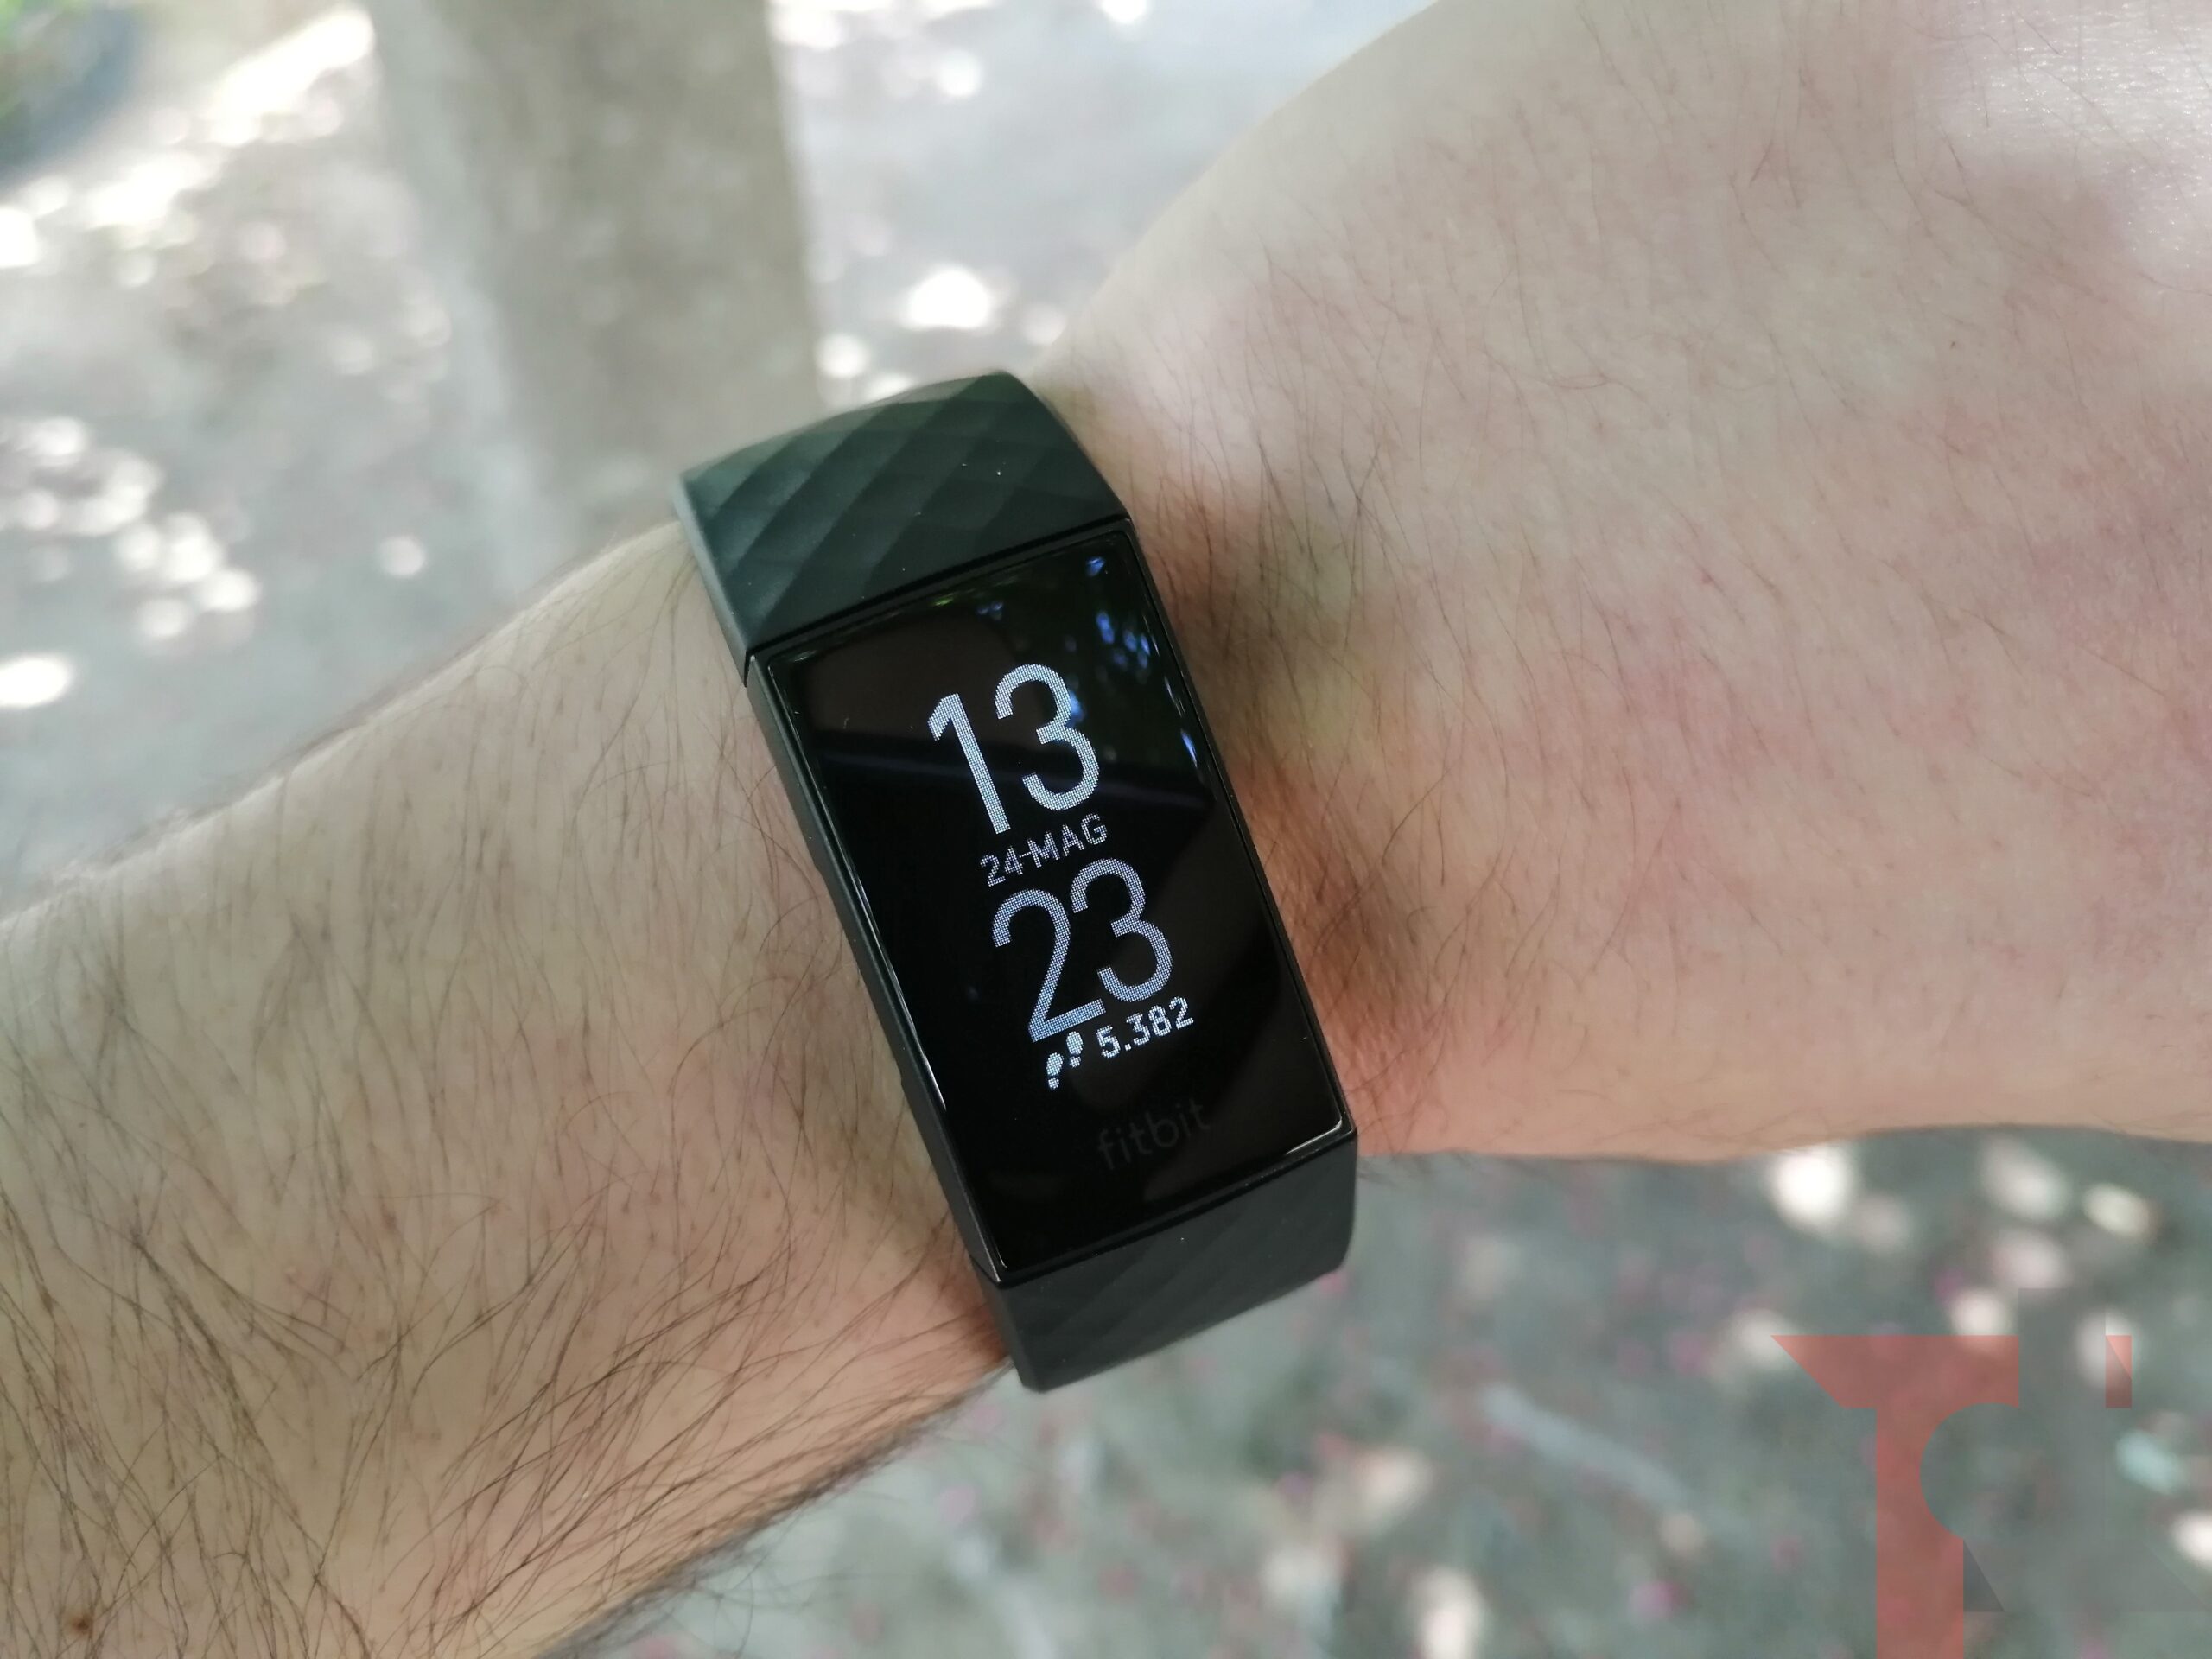 when is the fitbit charge 4 coming out